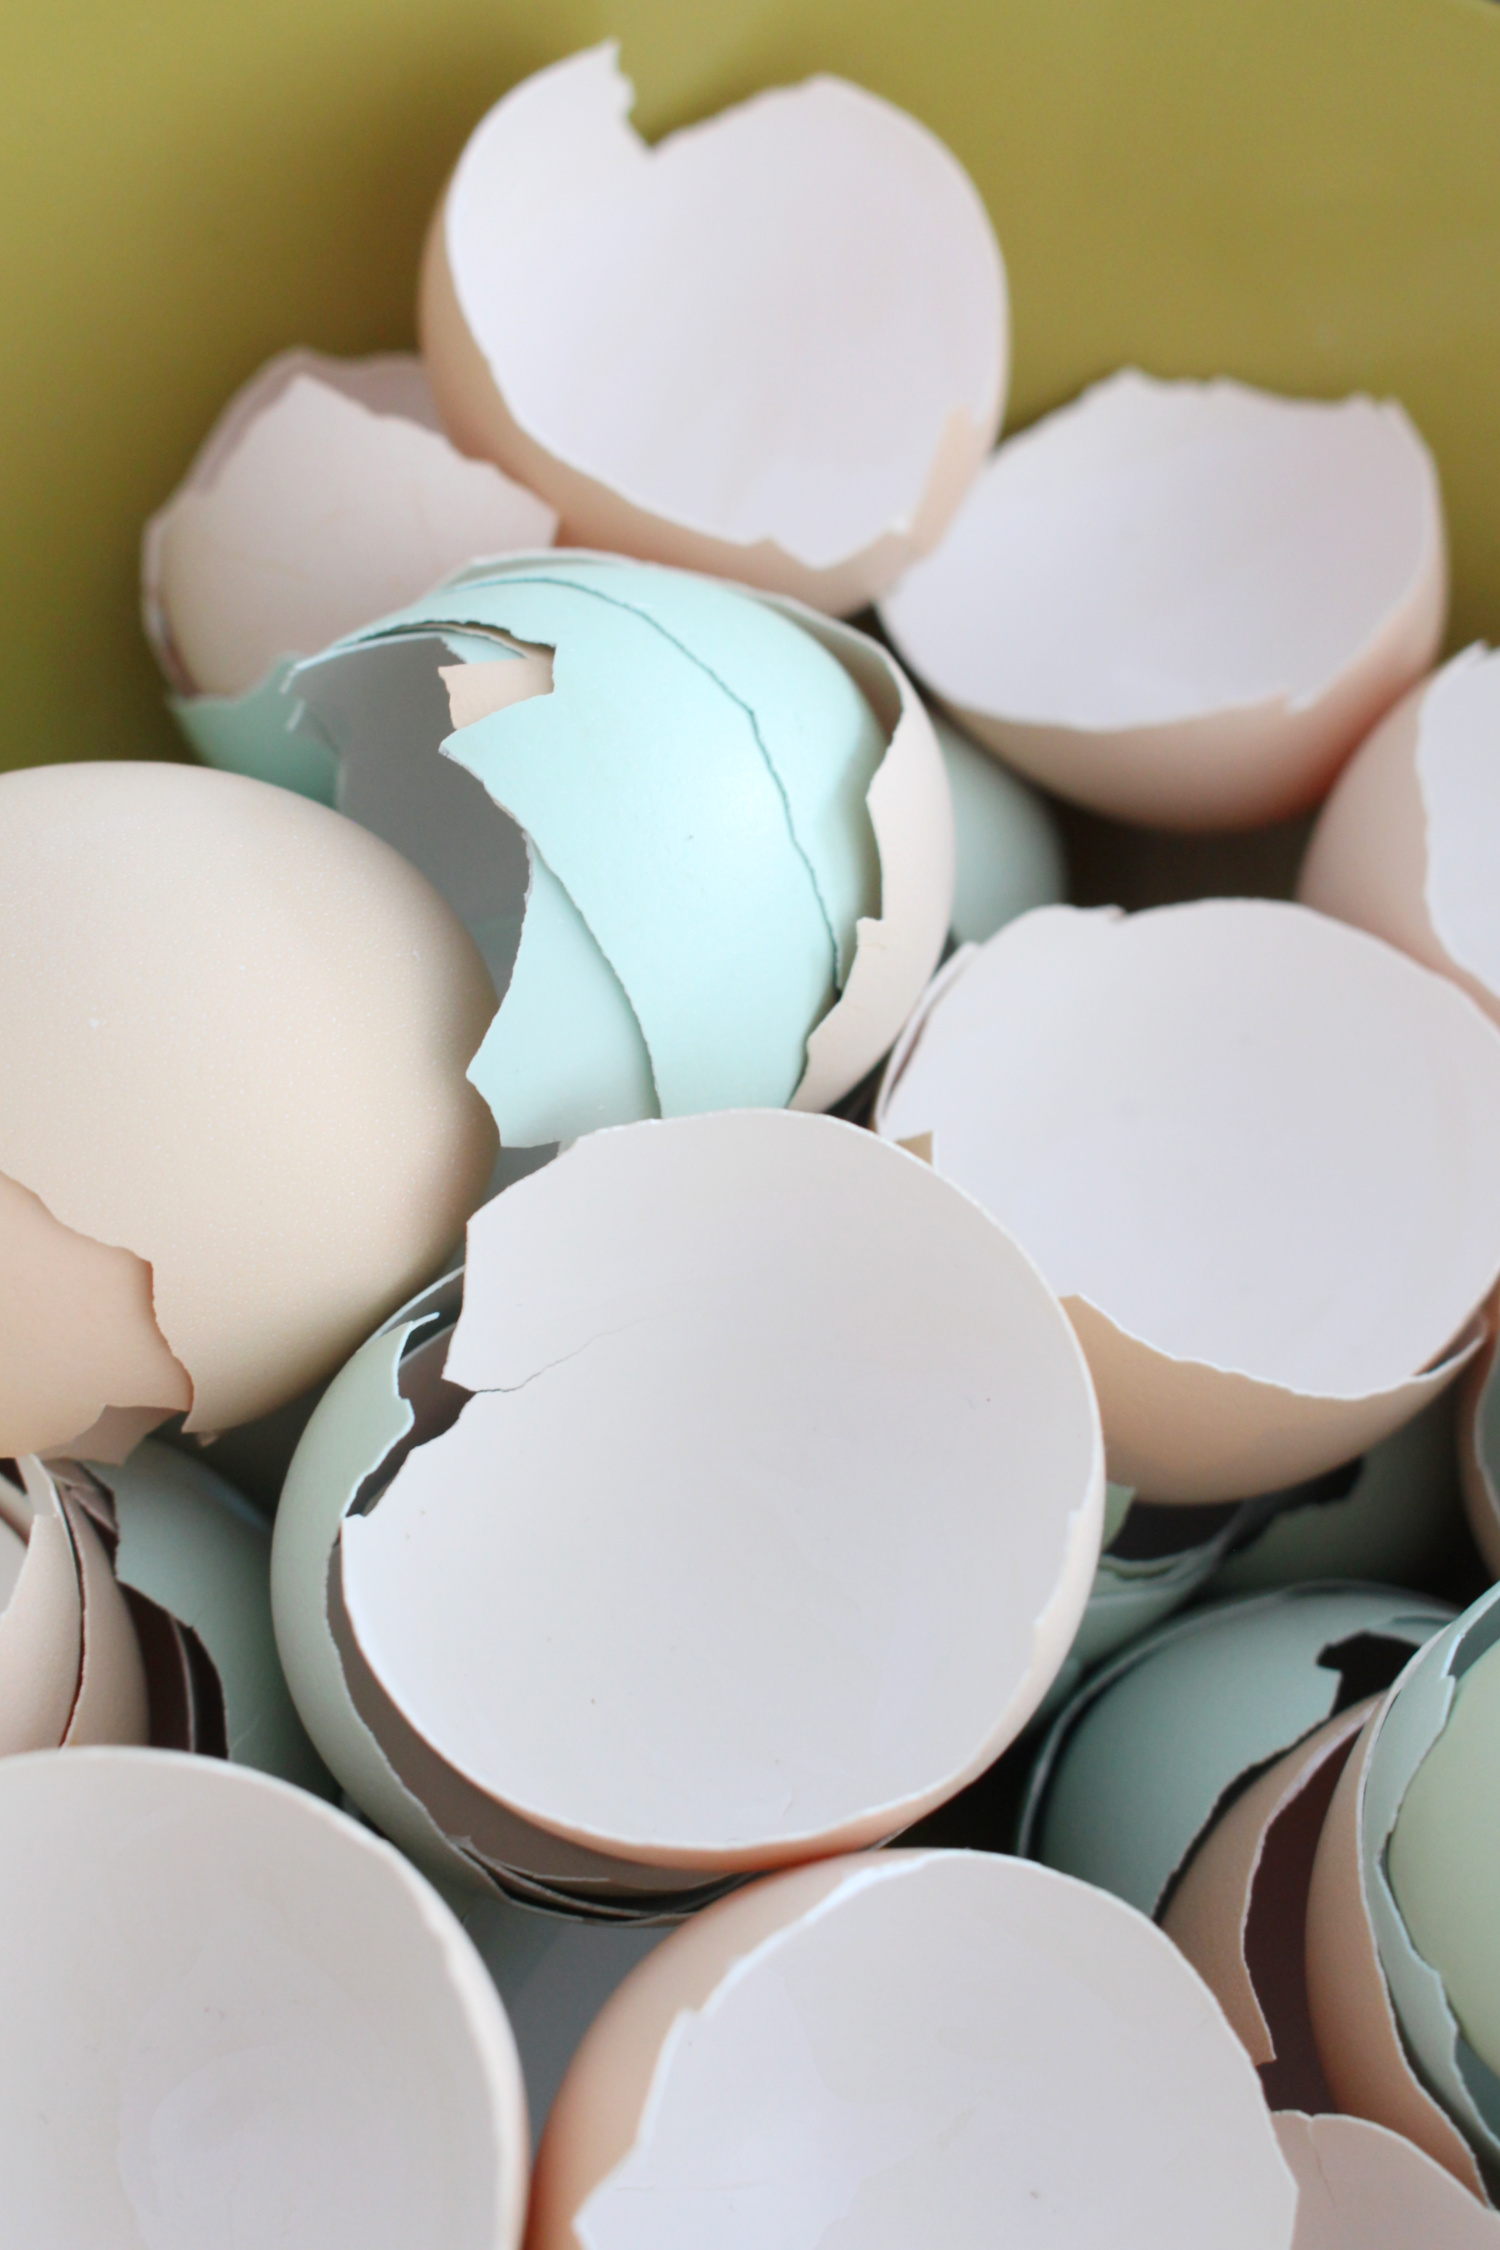 Crafts to Make with Egg Shells